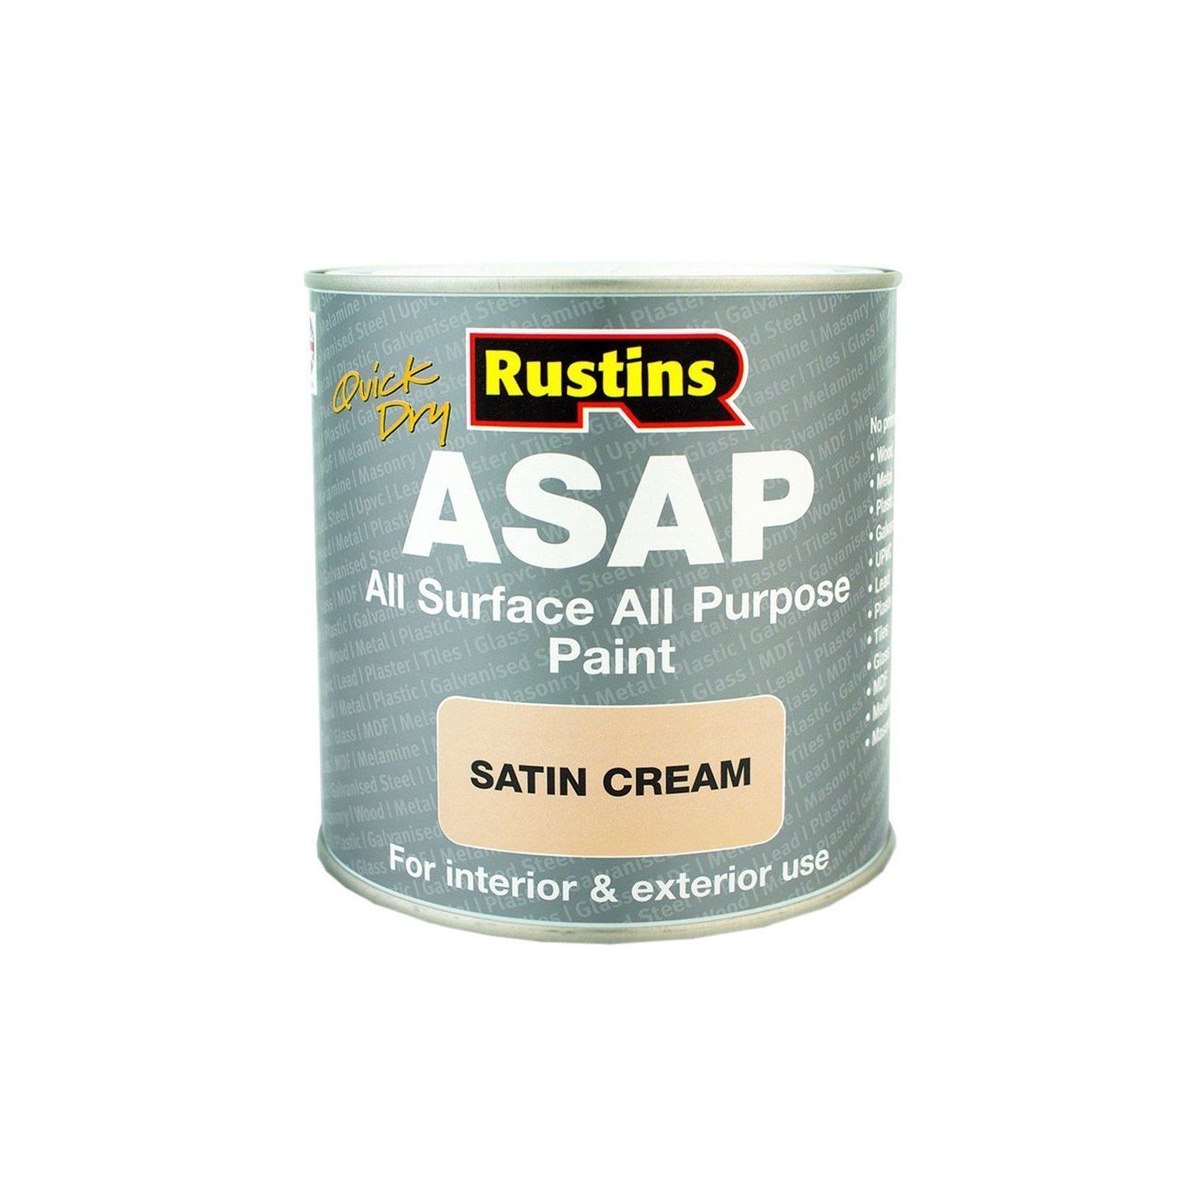 Rustins Quick Dry All Surface All Purpose Paint (ASAP) Cream 1 Litre